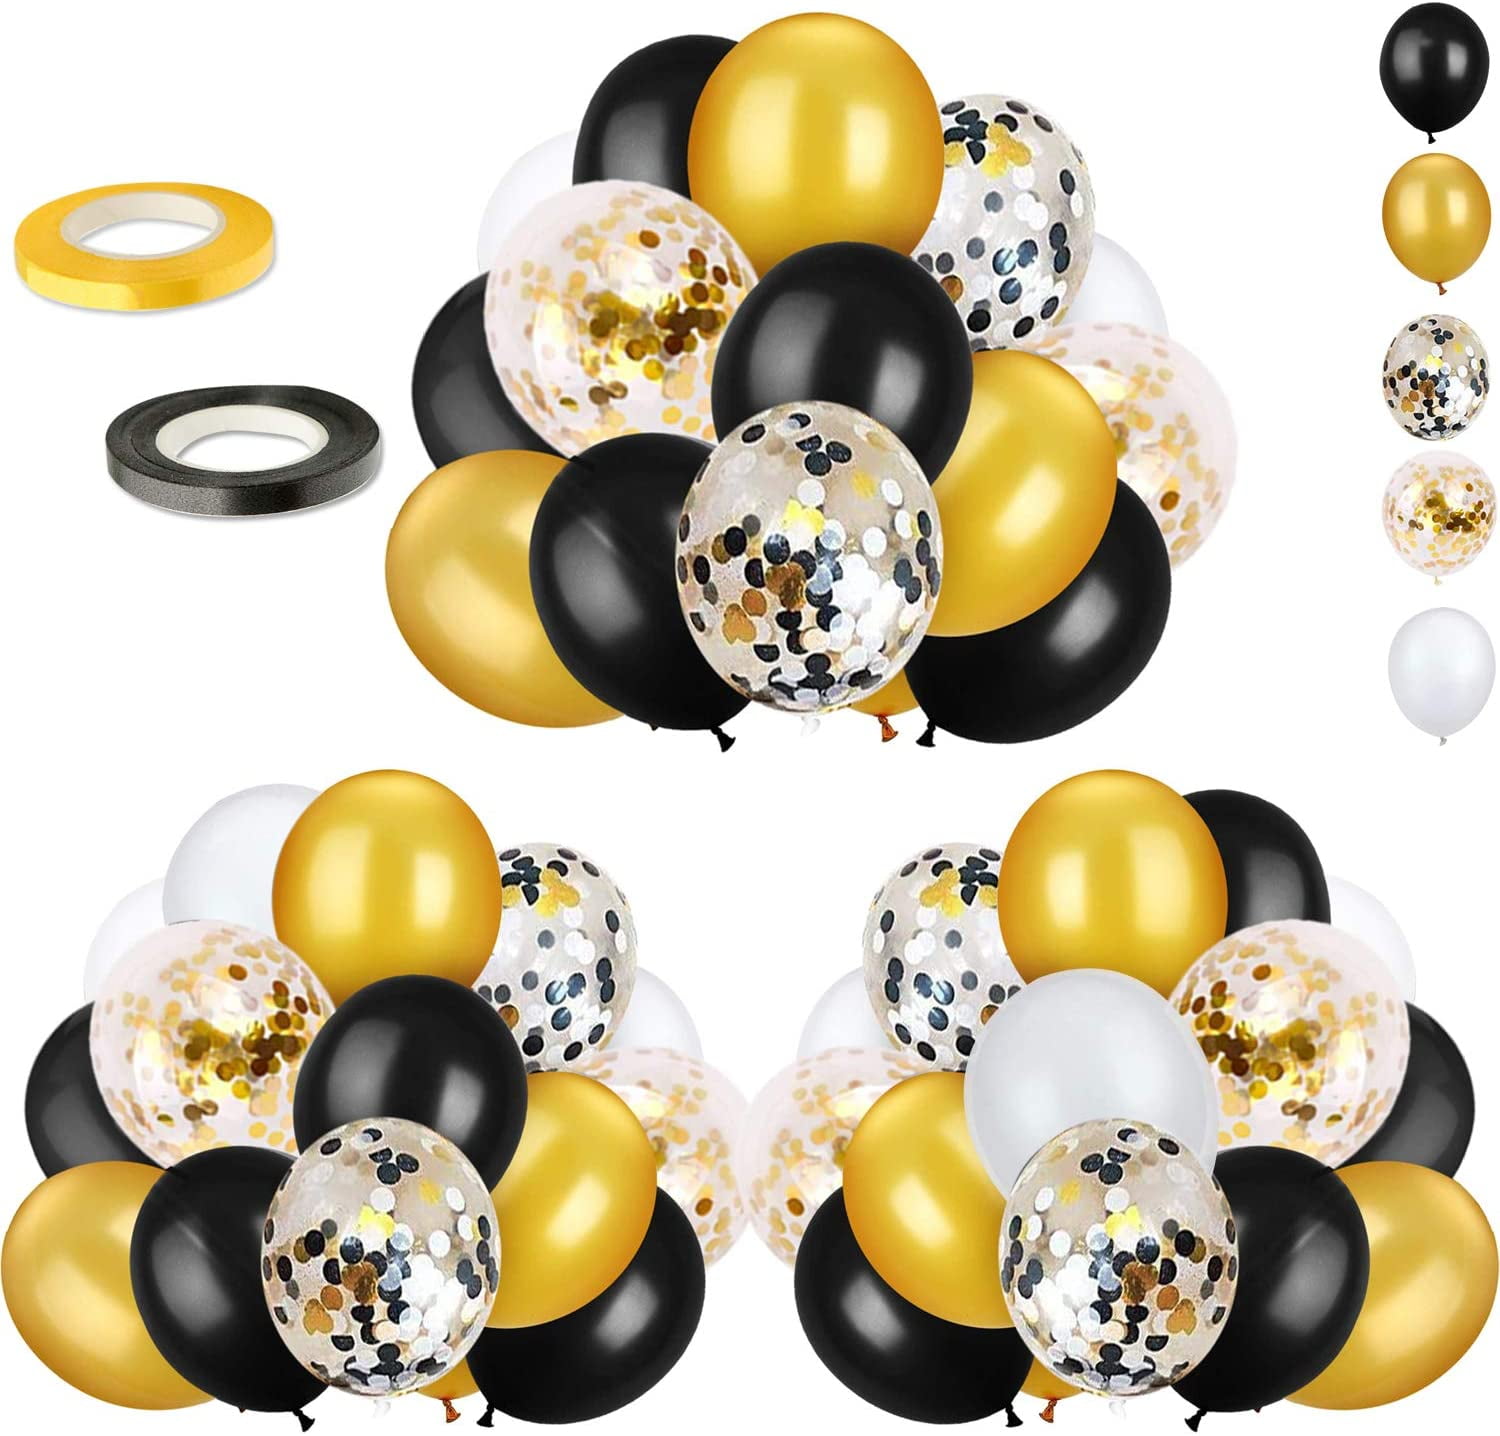 30-100 12"inch LARGE BALLOONS helium high Quality Party Birthday Wedding